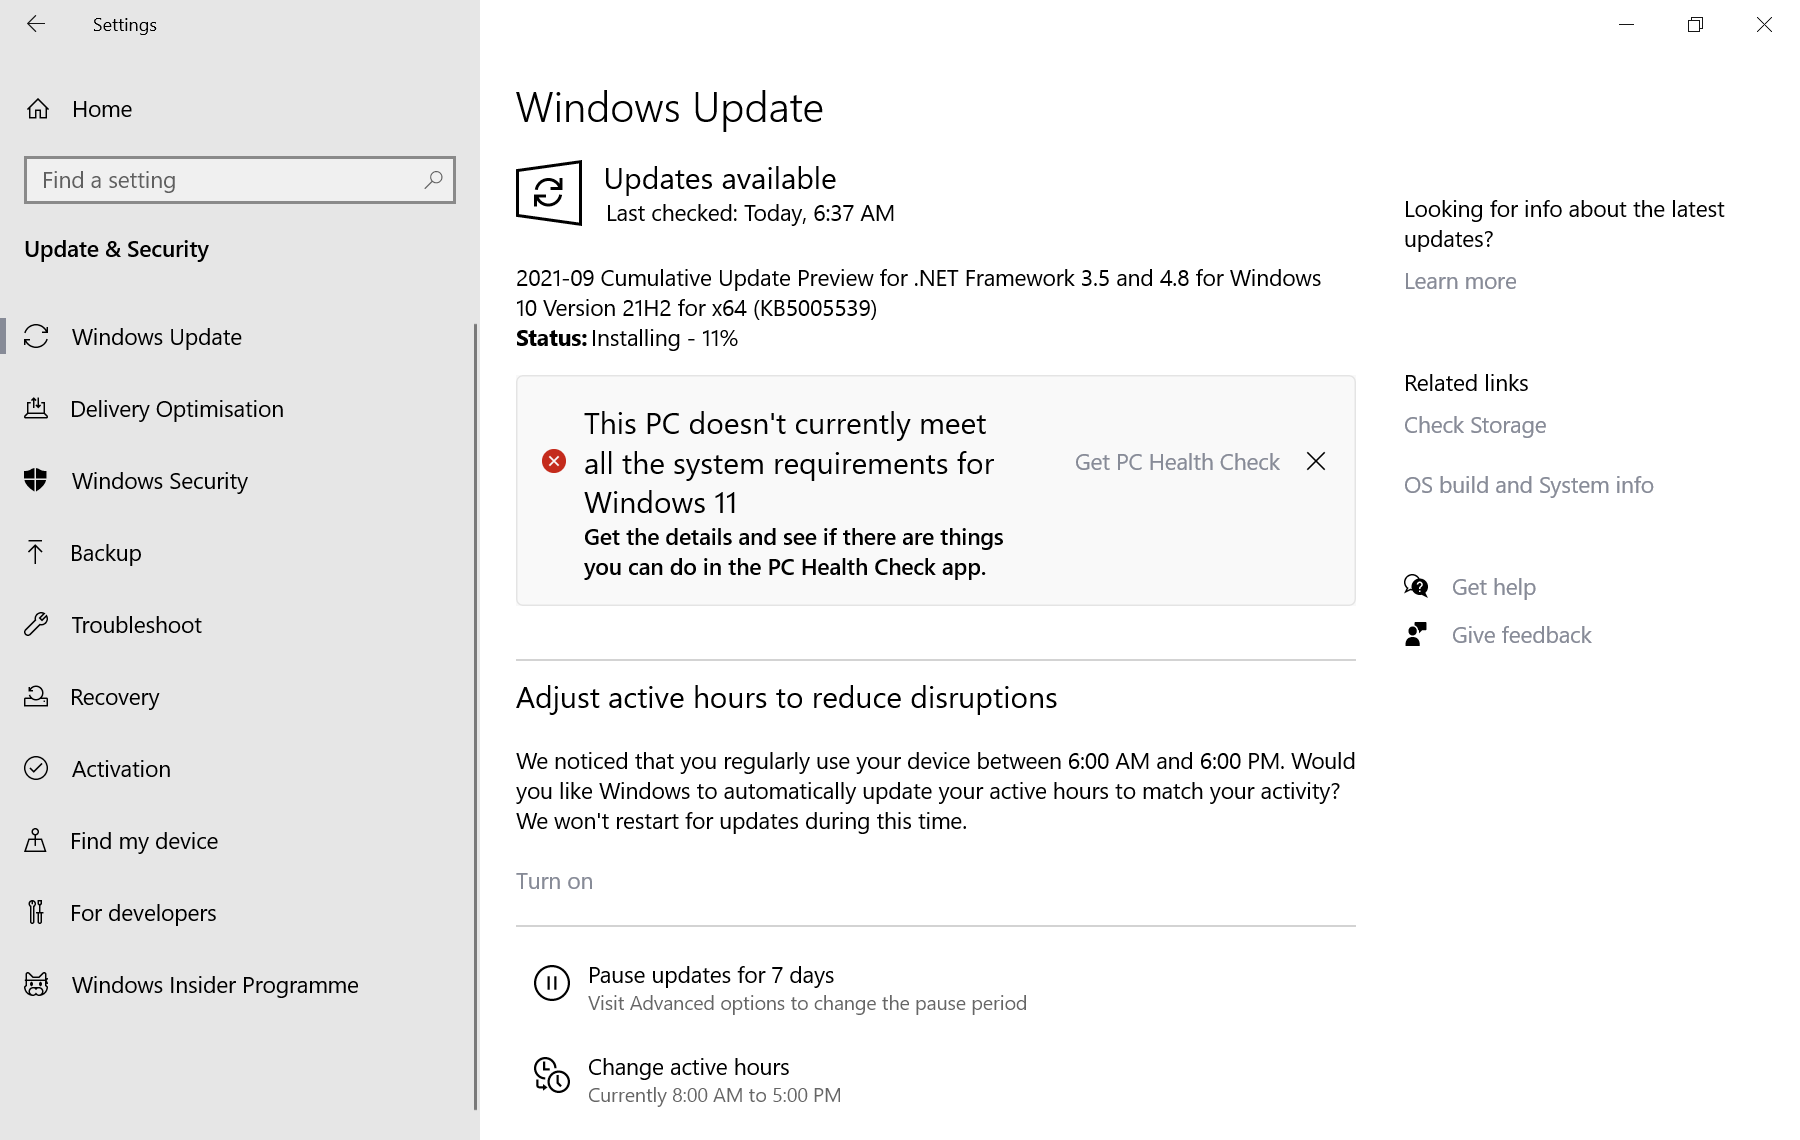 this pc doesn't currently meet all the system requirements for windows 11